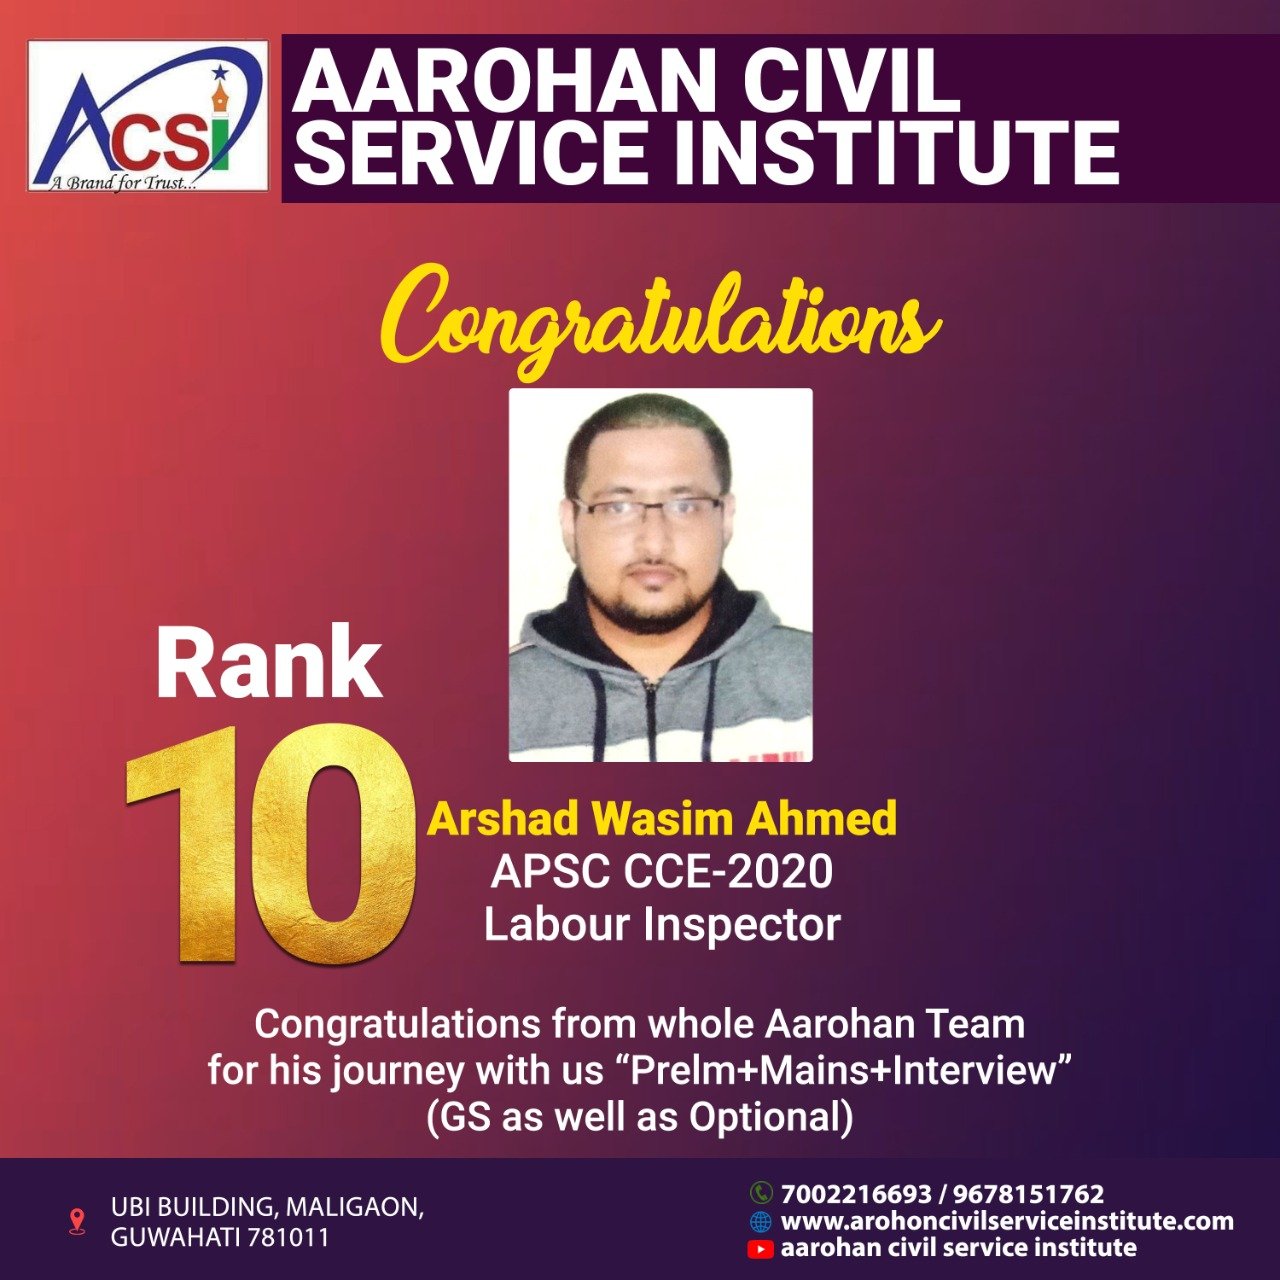 APSC CCE-2020 Result (2022) Arshad Arman Ahmed # Labour Inspector